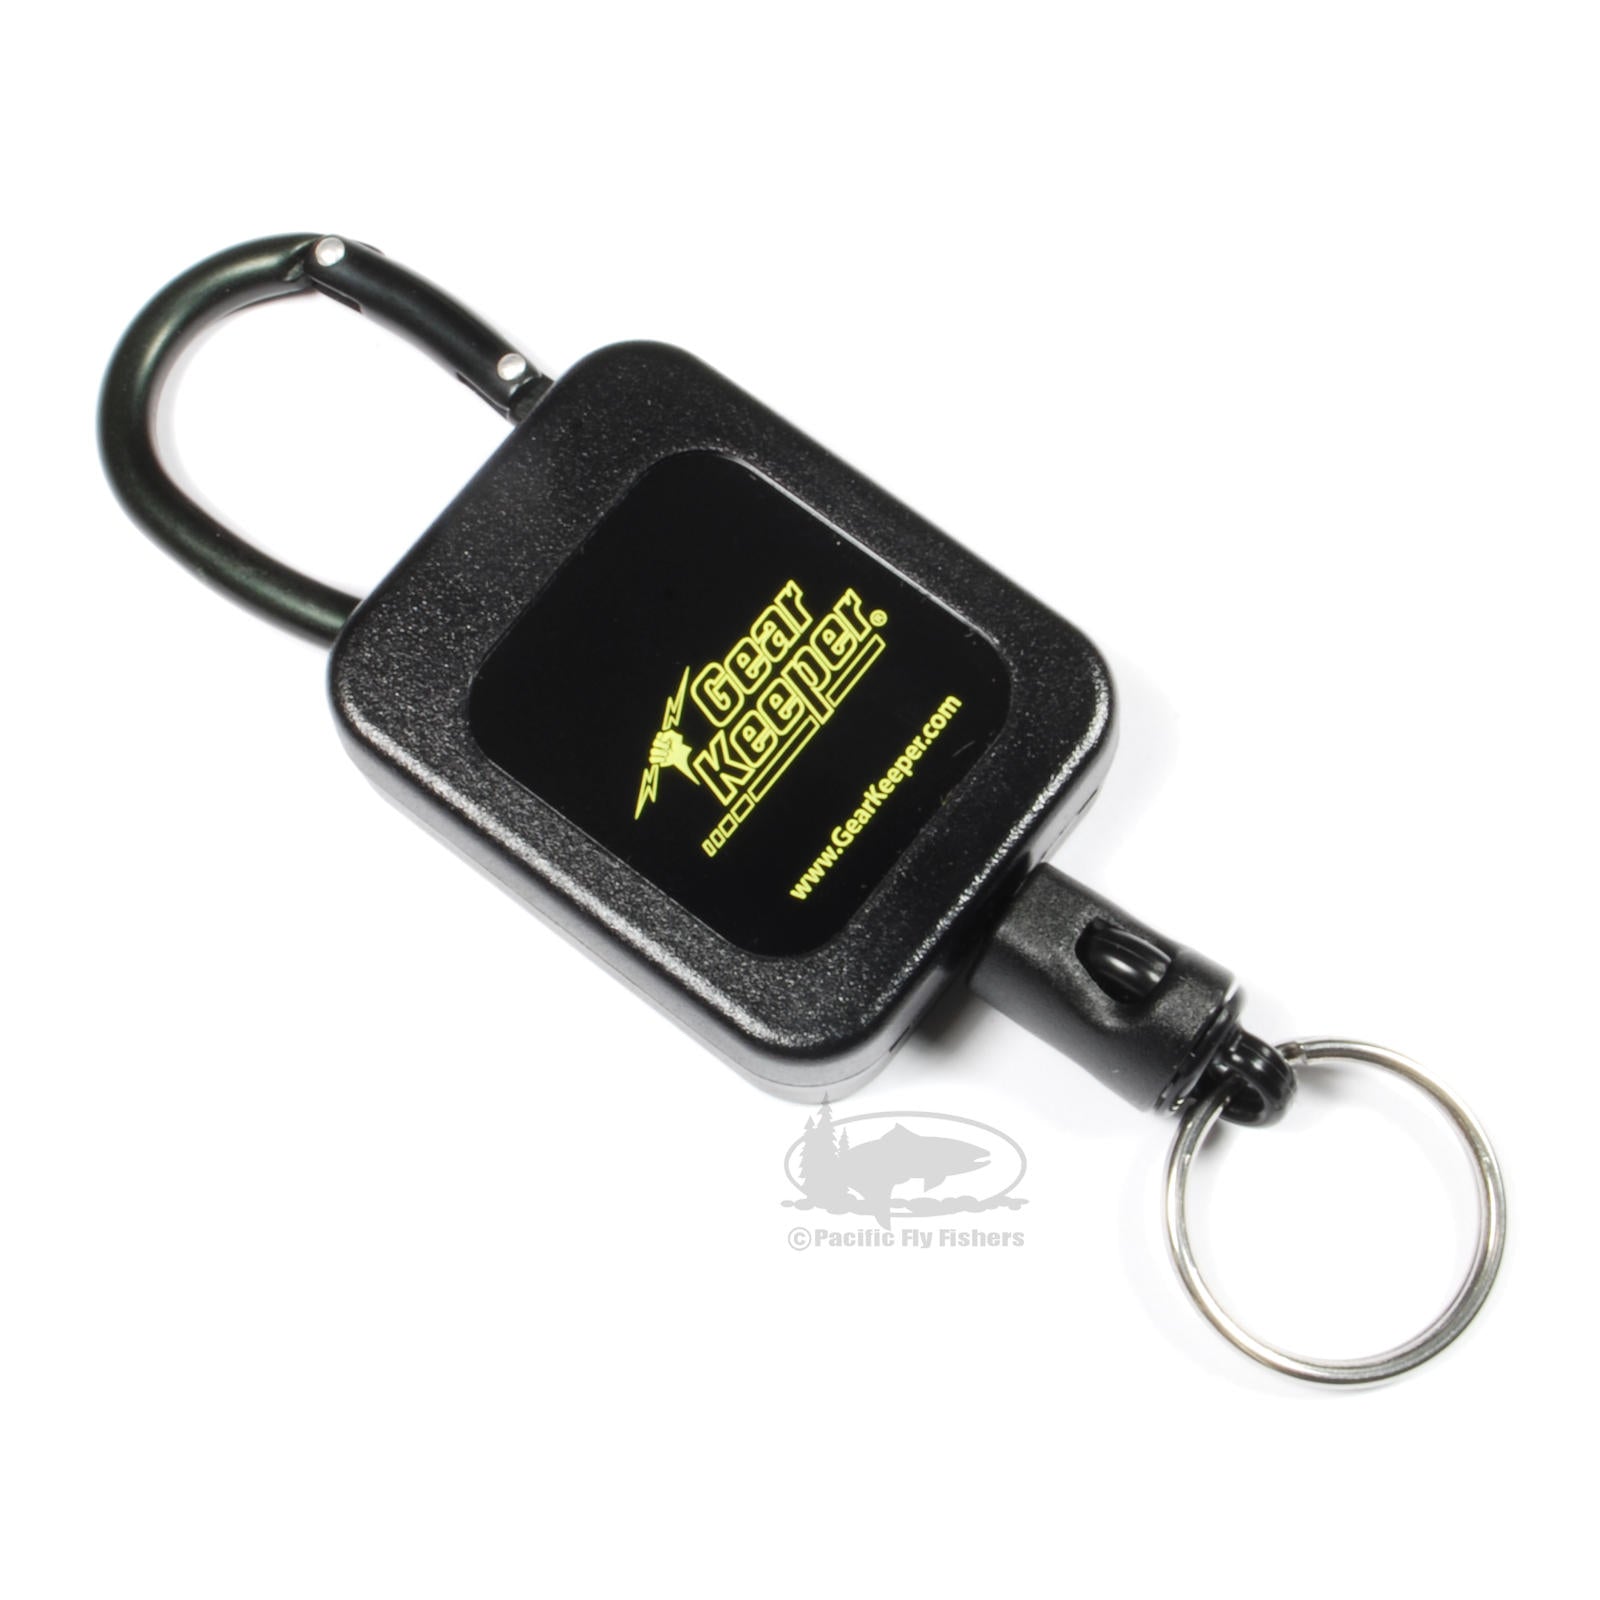 Smart Phone Tether for Fly Fishing » Gear Keeper Retractors by